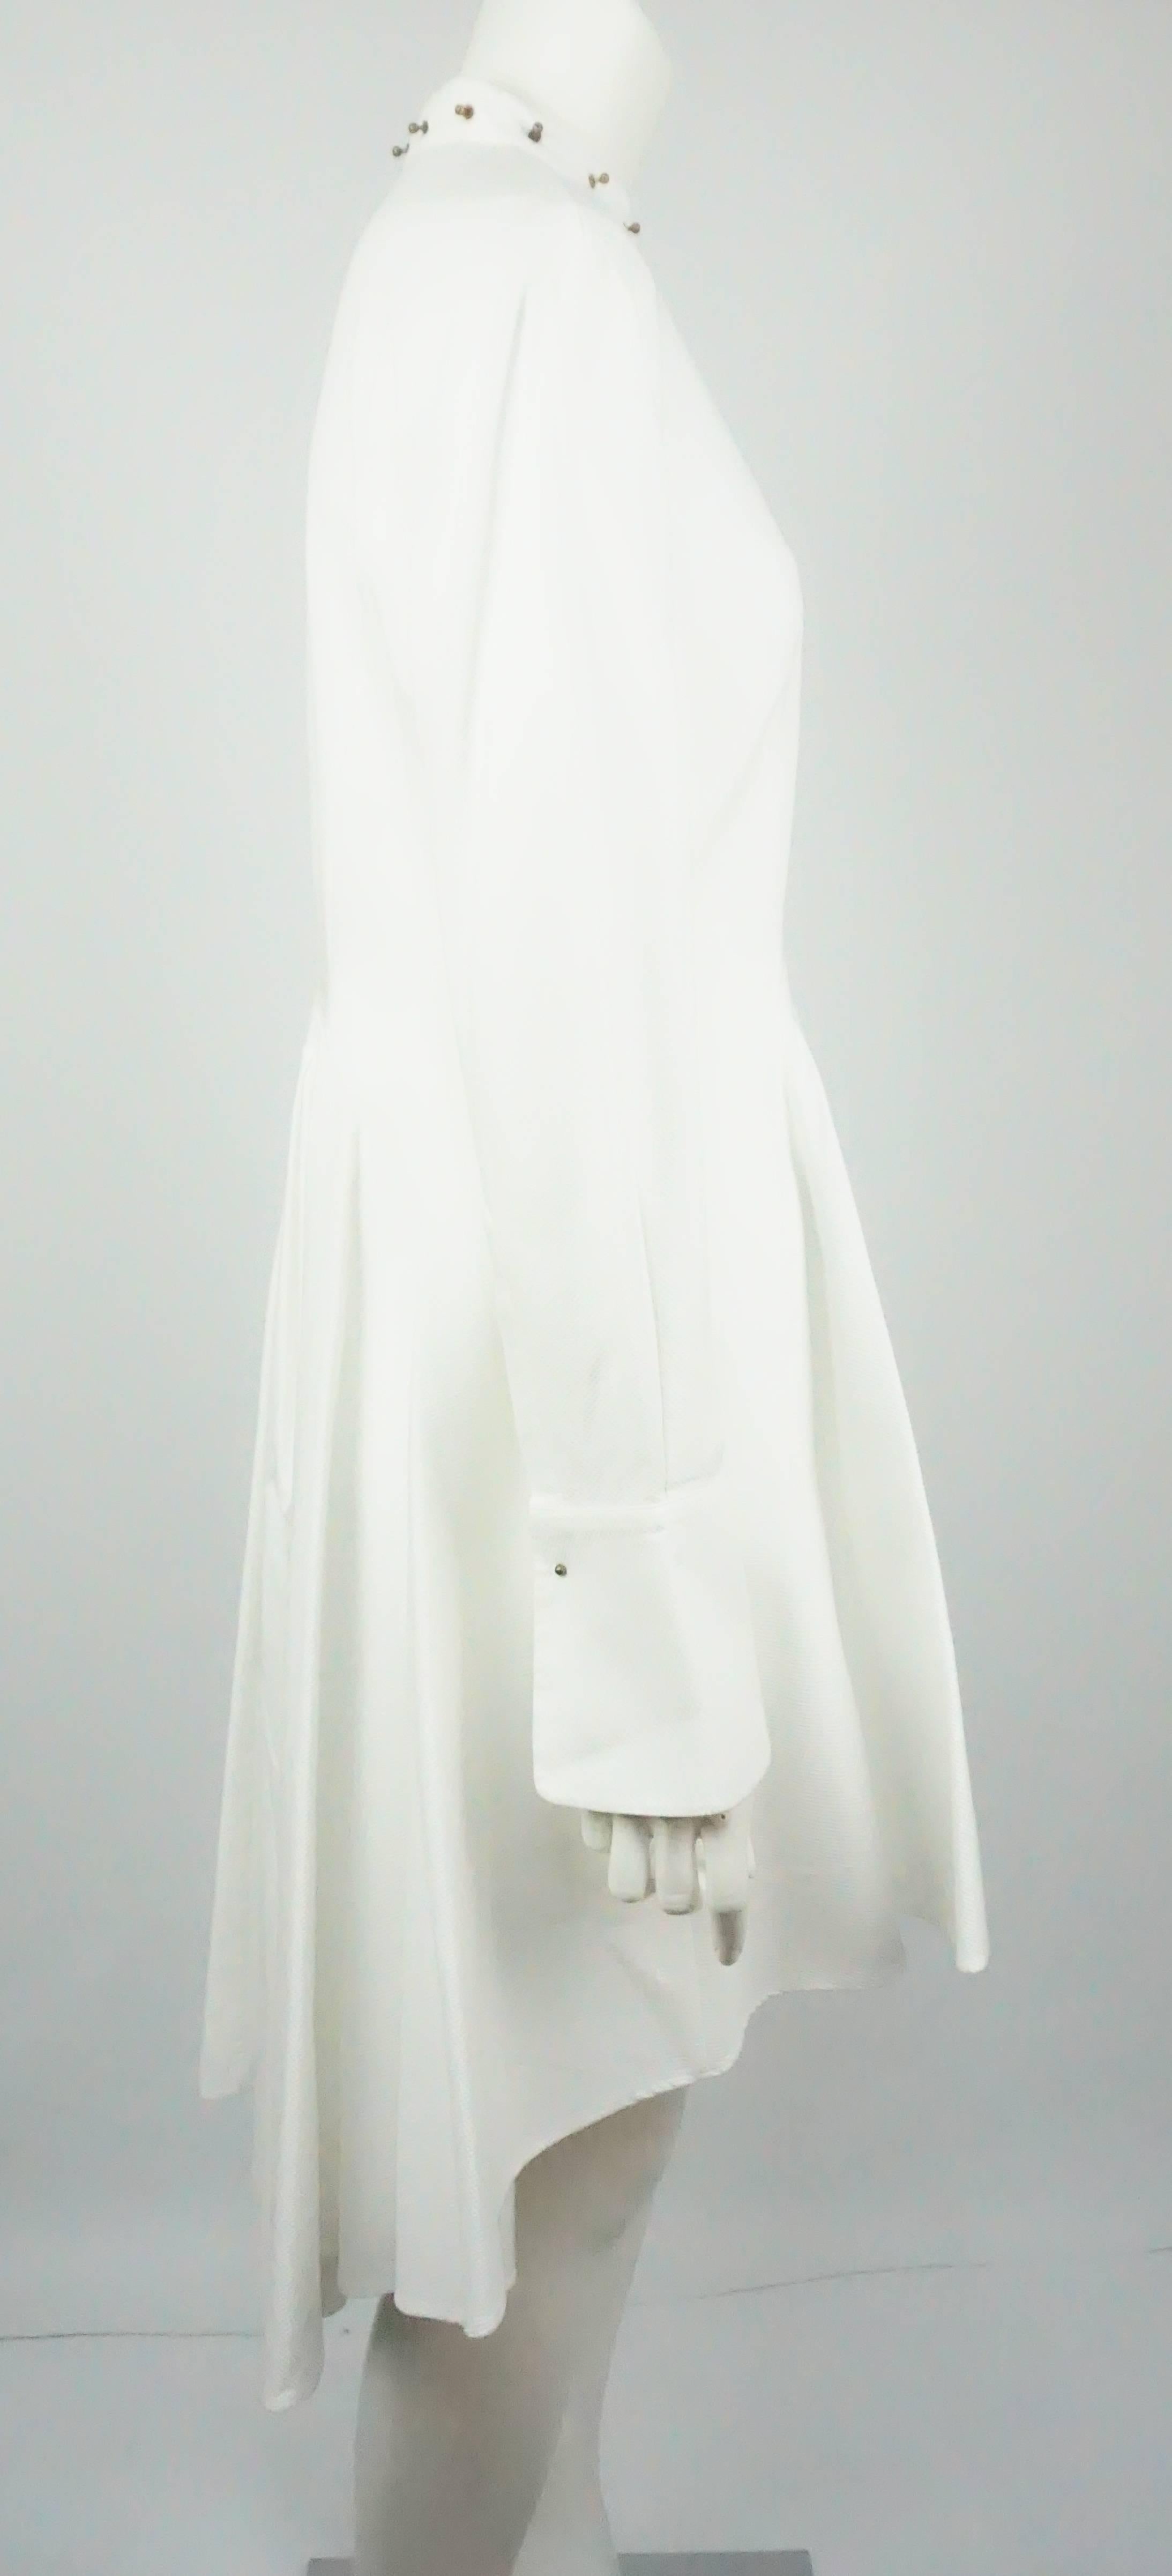 Alexander McQueen White Pique Long Tunic/3/4 Coat - M  This beautiful White Cotton Pique McQueen piece can be worn as a tunic, a 3/4 Coat or even a dress. The piece has a high low effect, has hidden buttons completely down the front, Brass looking